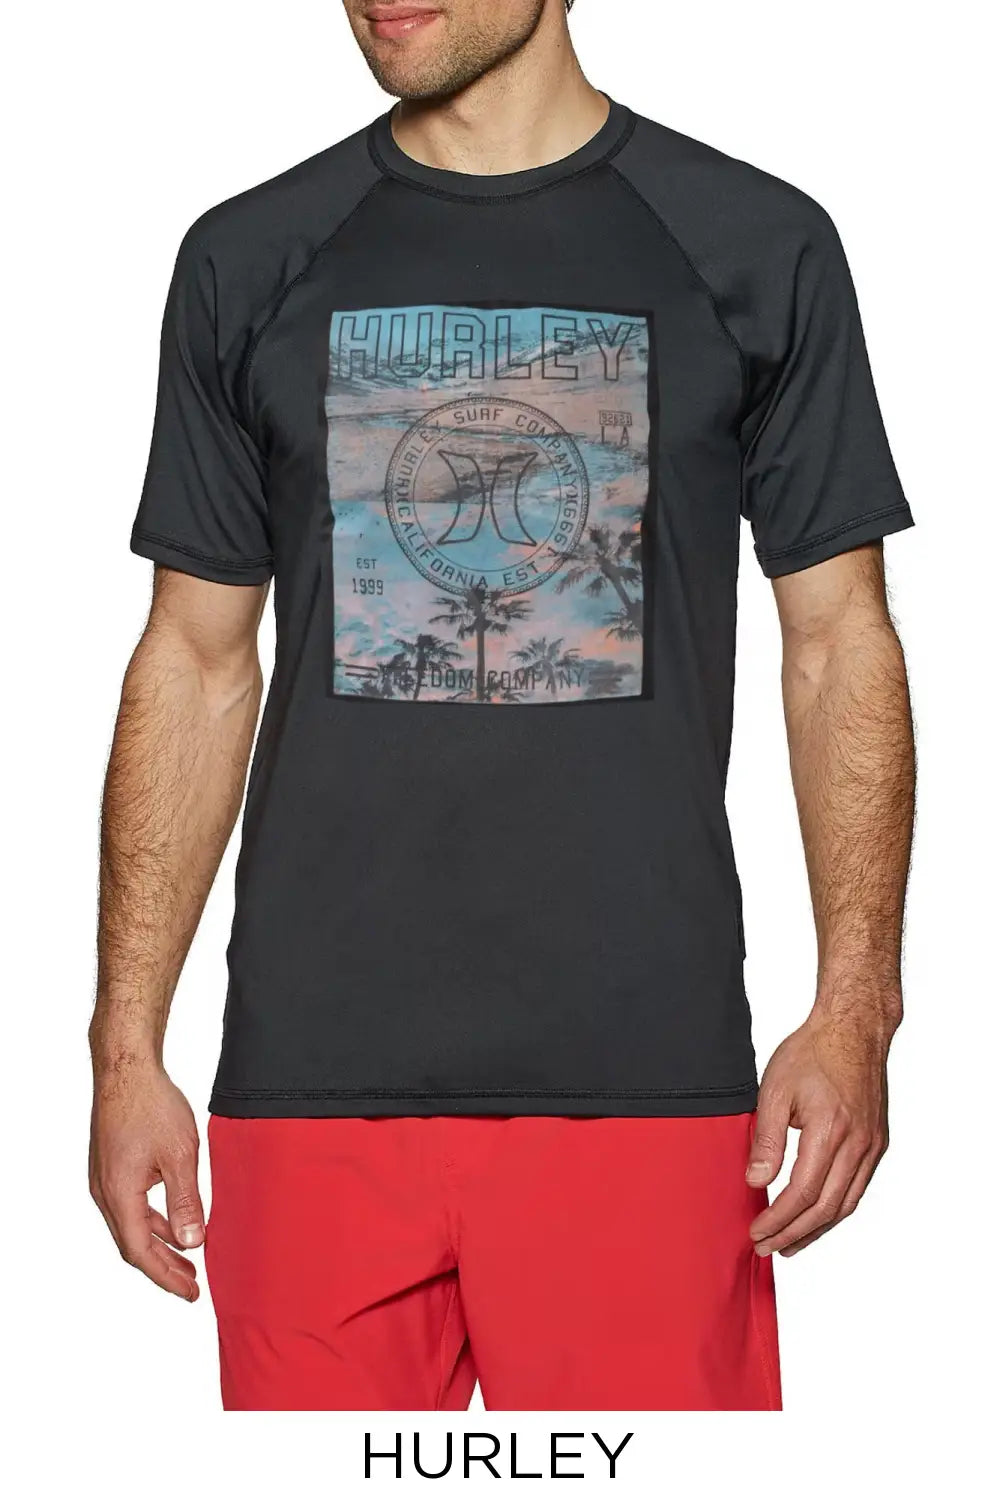 Hurley Surf Water sports T-Shirt Black 5 / S